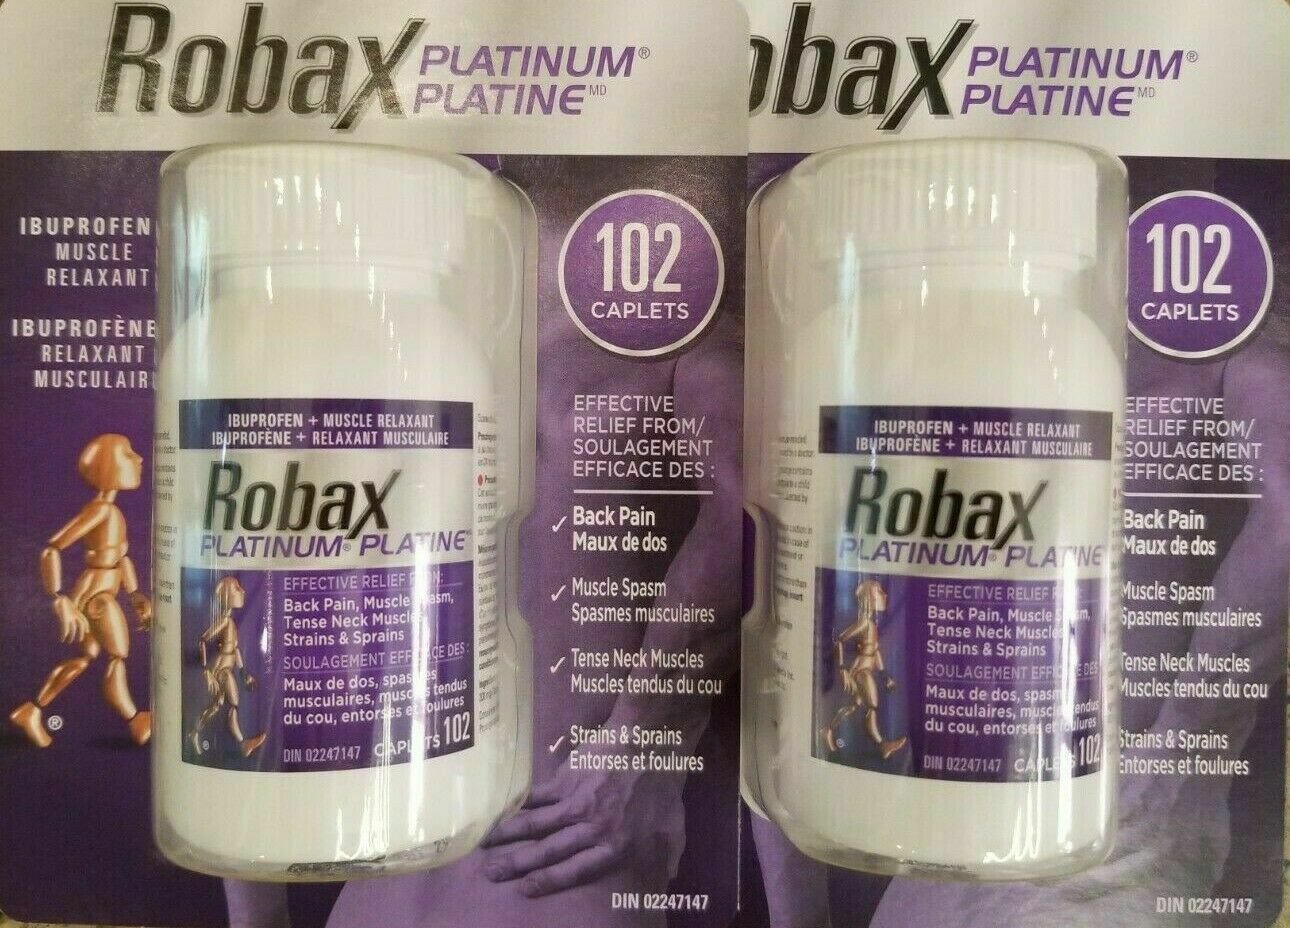 3X ROBAX Platinum Muscle and Back Pain Relief 102 Caplets Canada product